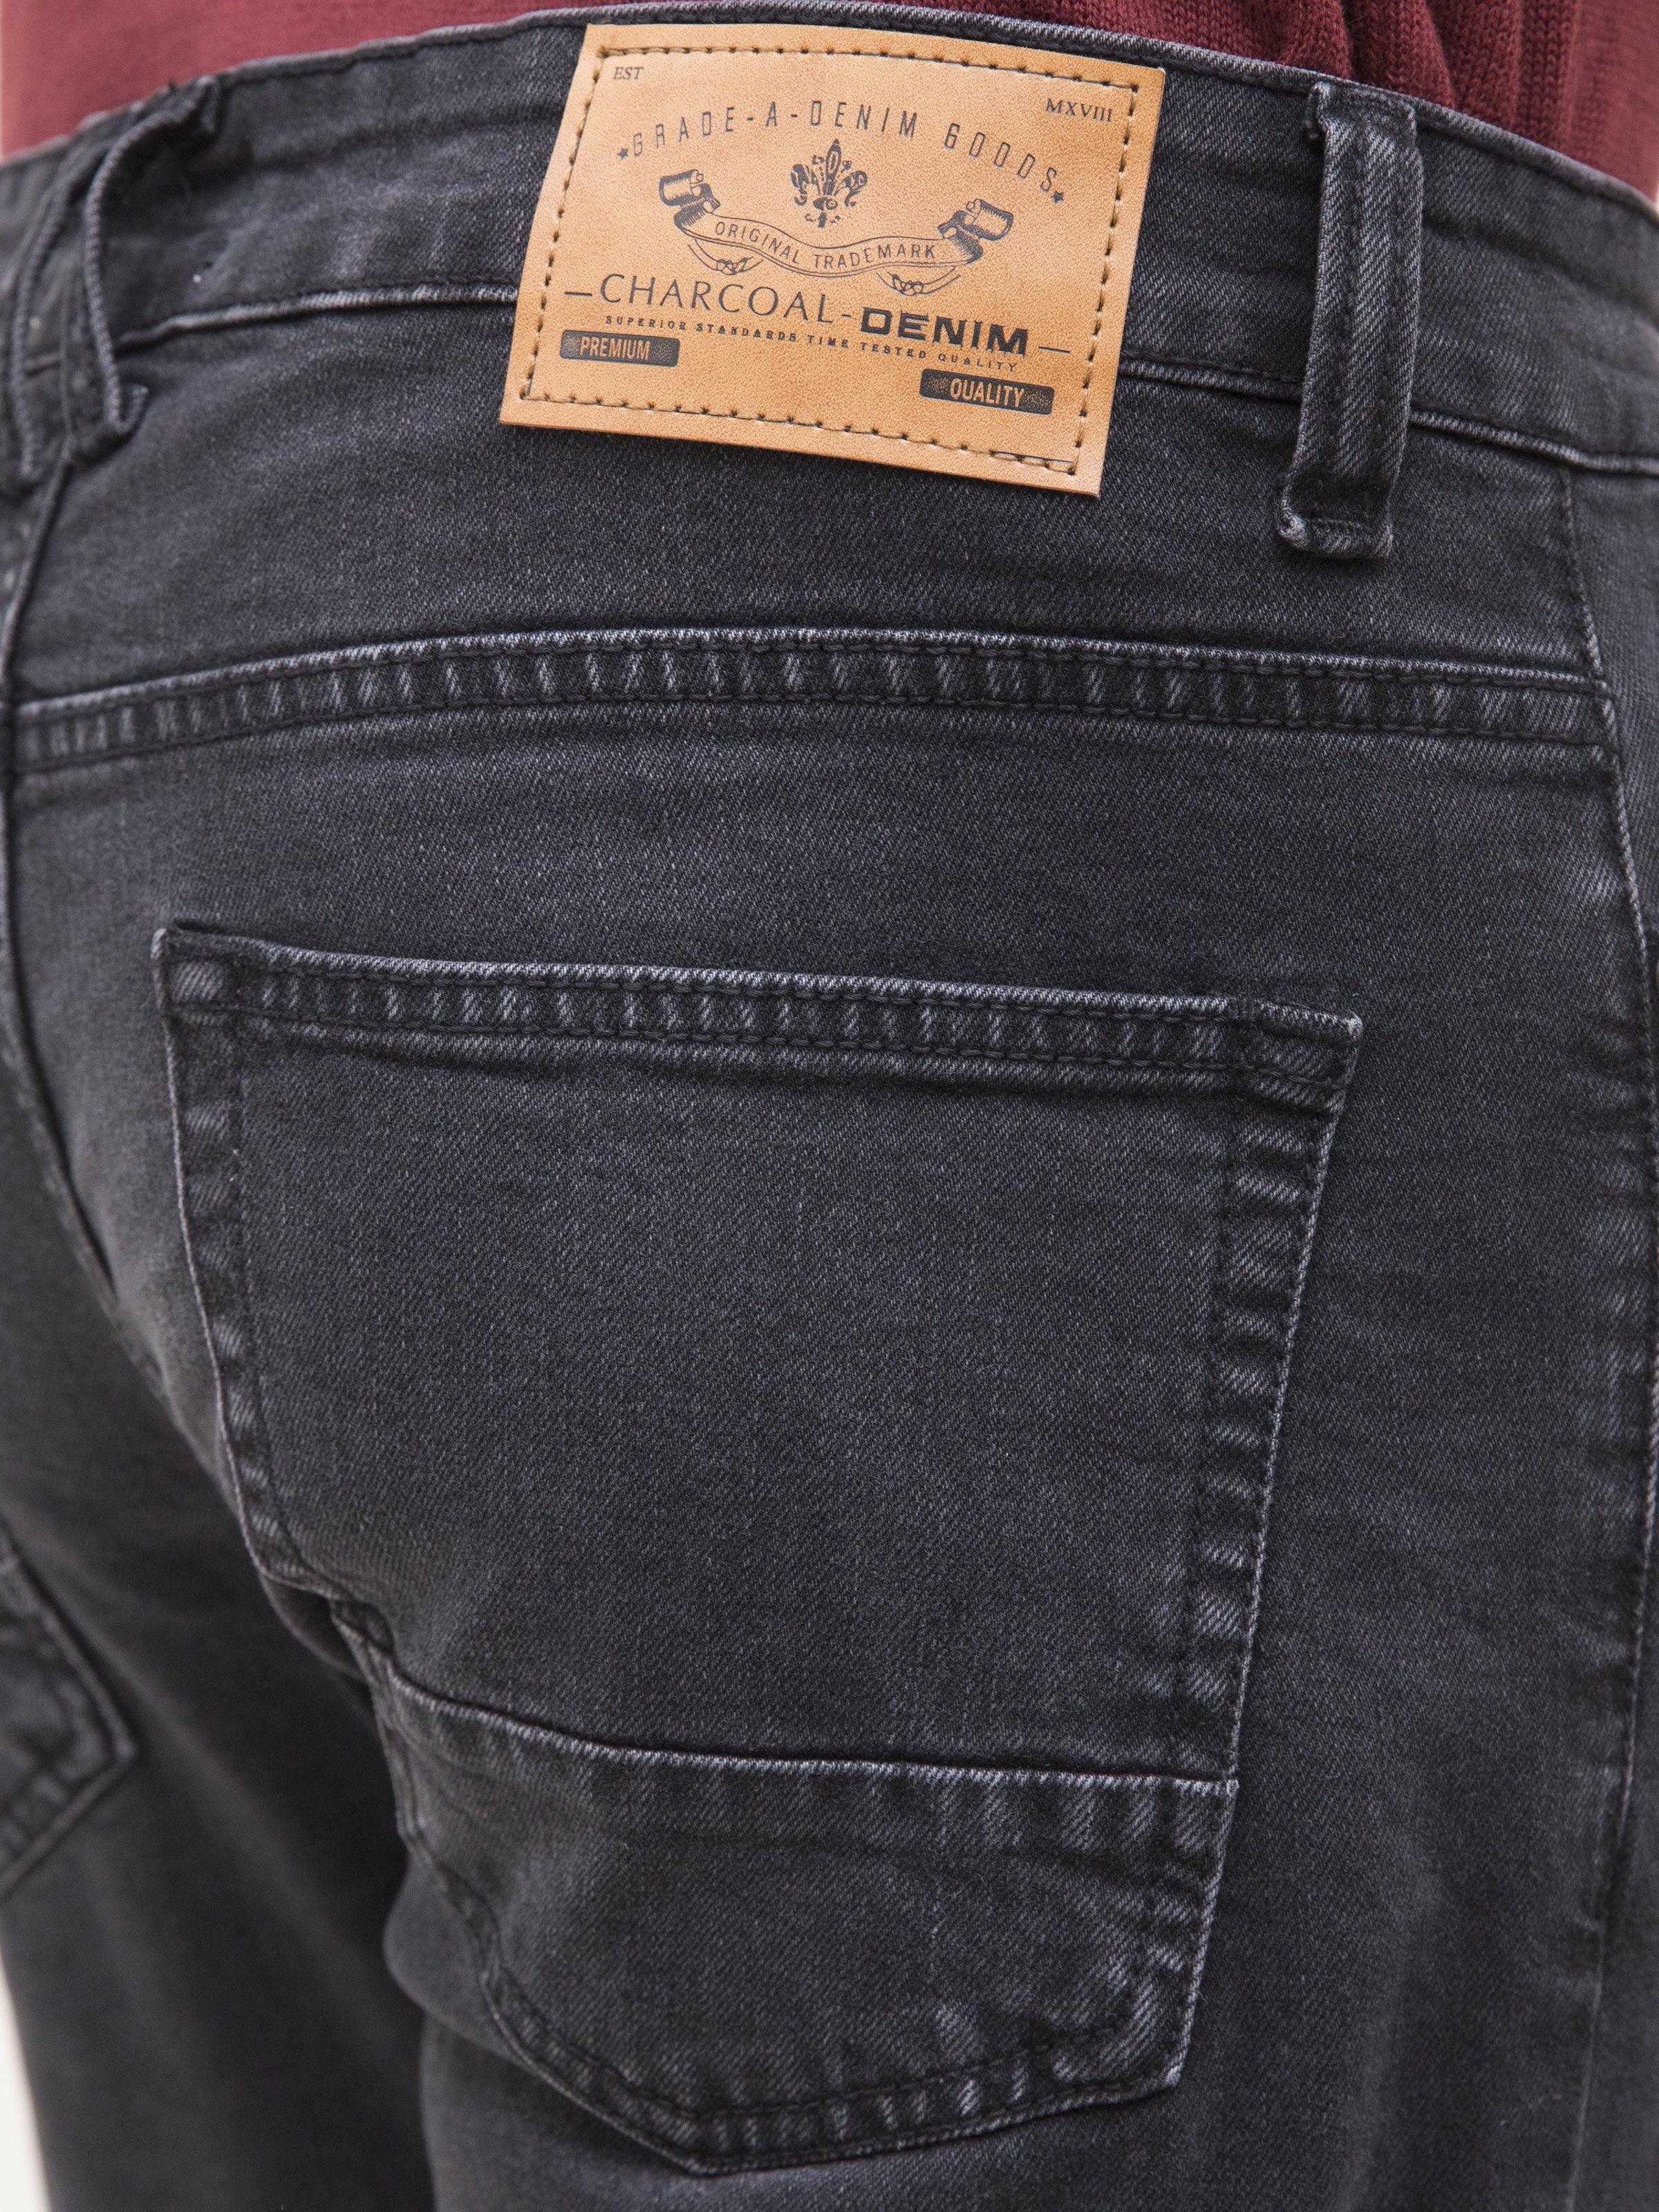 JEANS SLIM FIT DARK GREY at Charcoal Clothing